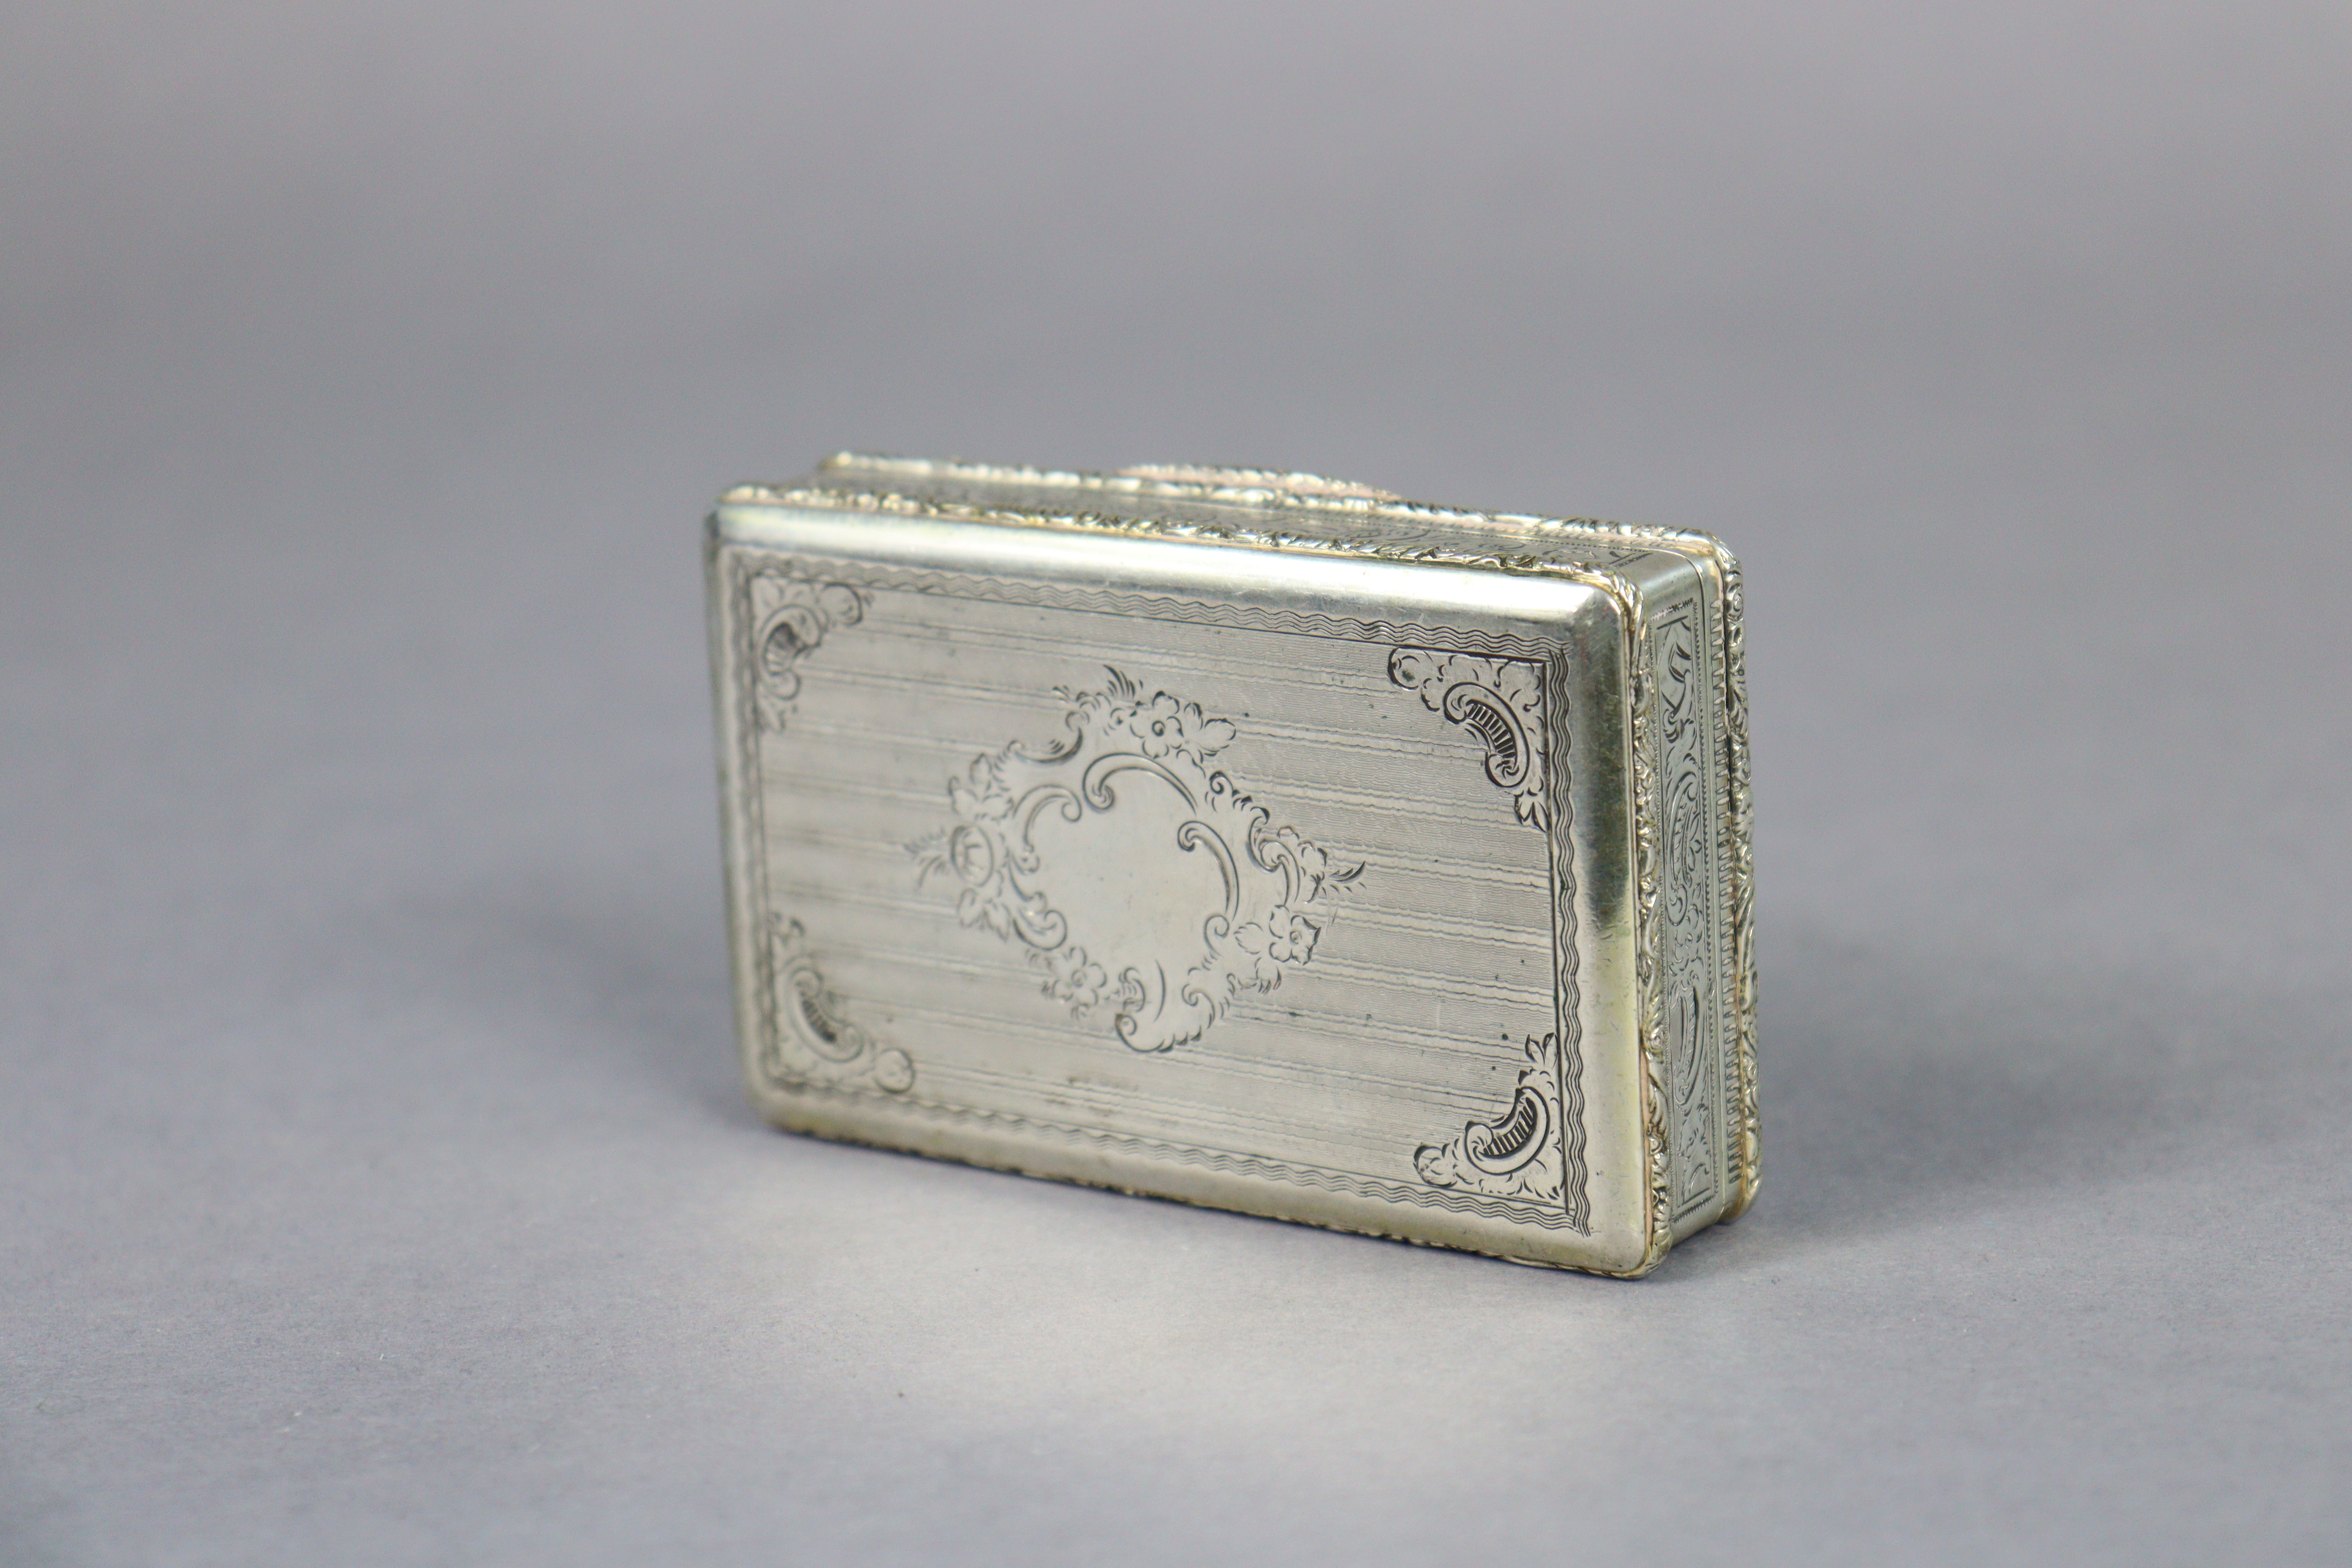 A mid-19th century Austro-Hungarian silver rectangular snuff box with all-over engraved floral & - Image 6 of 6